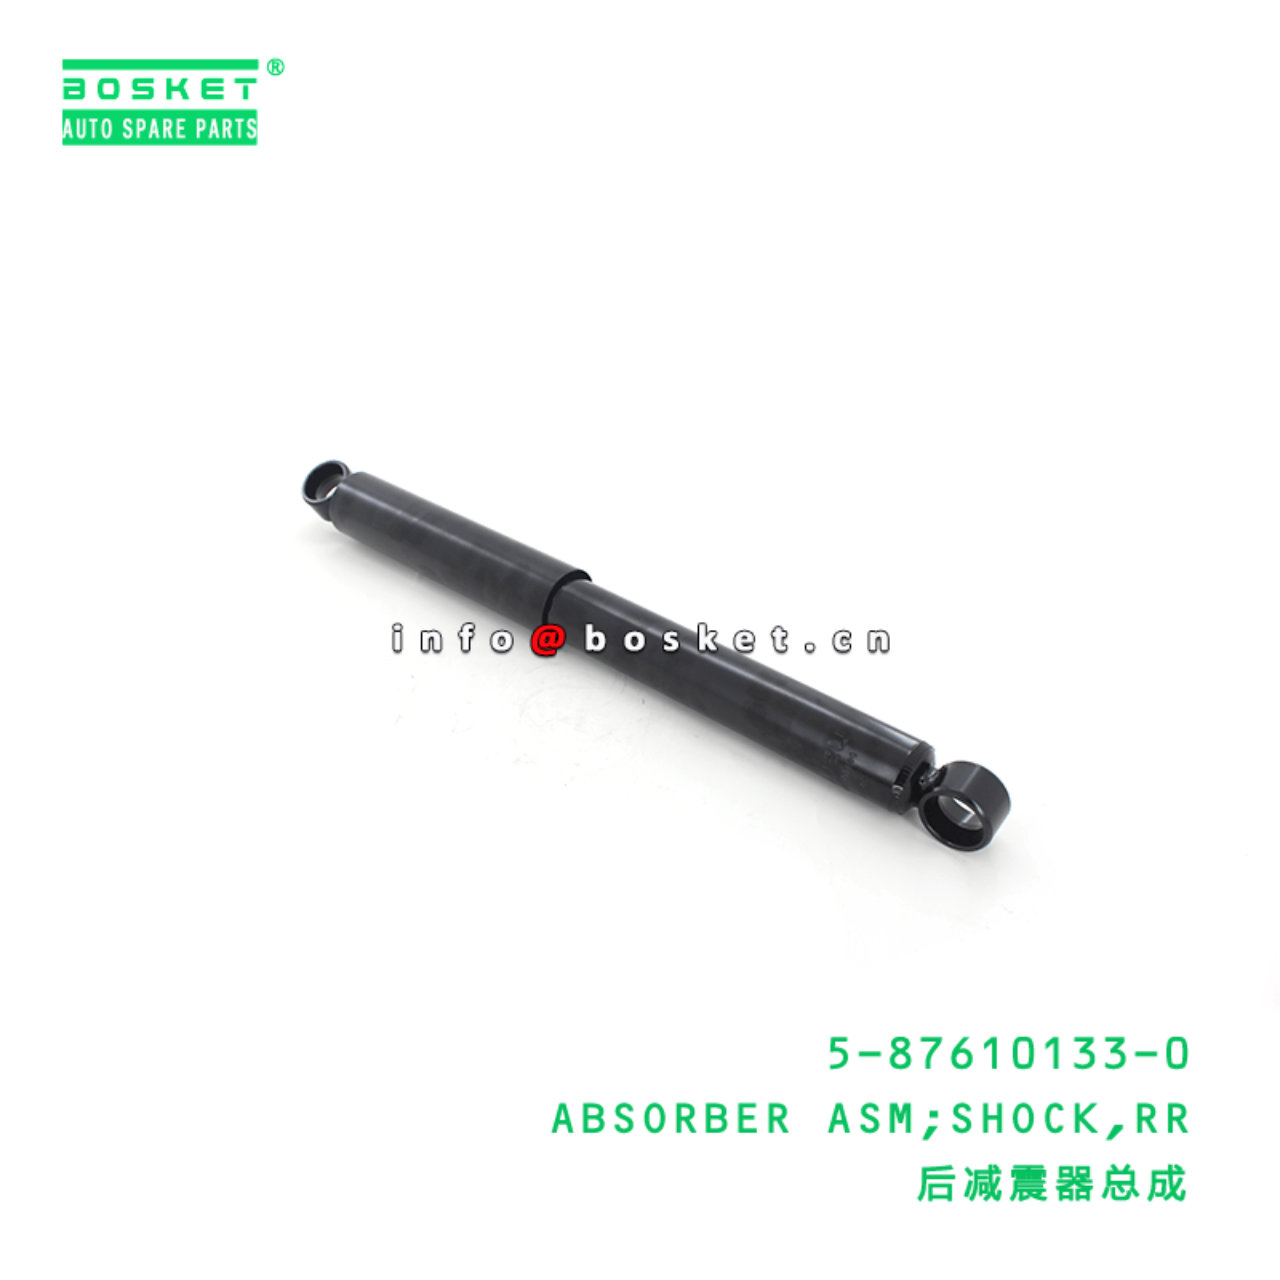 5-87610133-0 Rear Shock Absorber Assembly 5876101330 Suitable for ISUZU NPR NQR